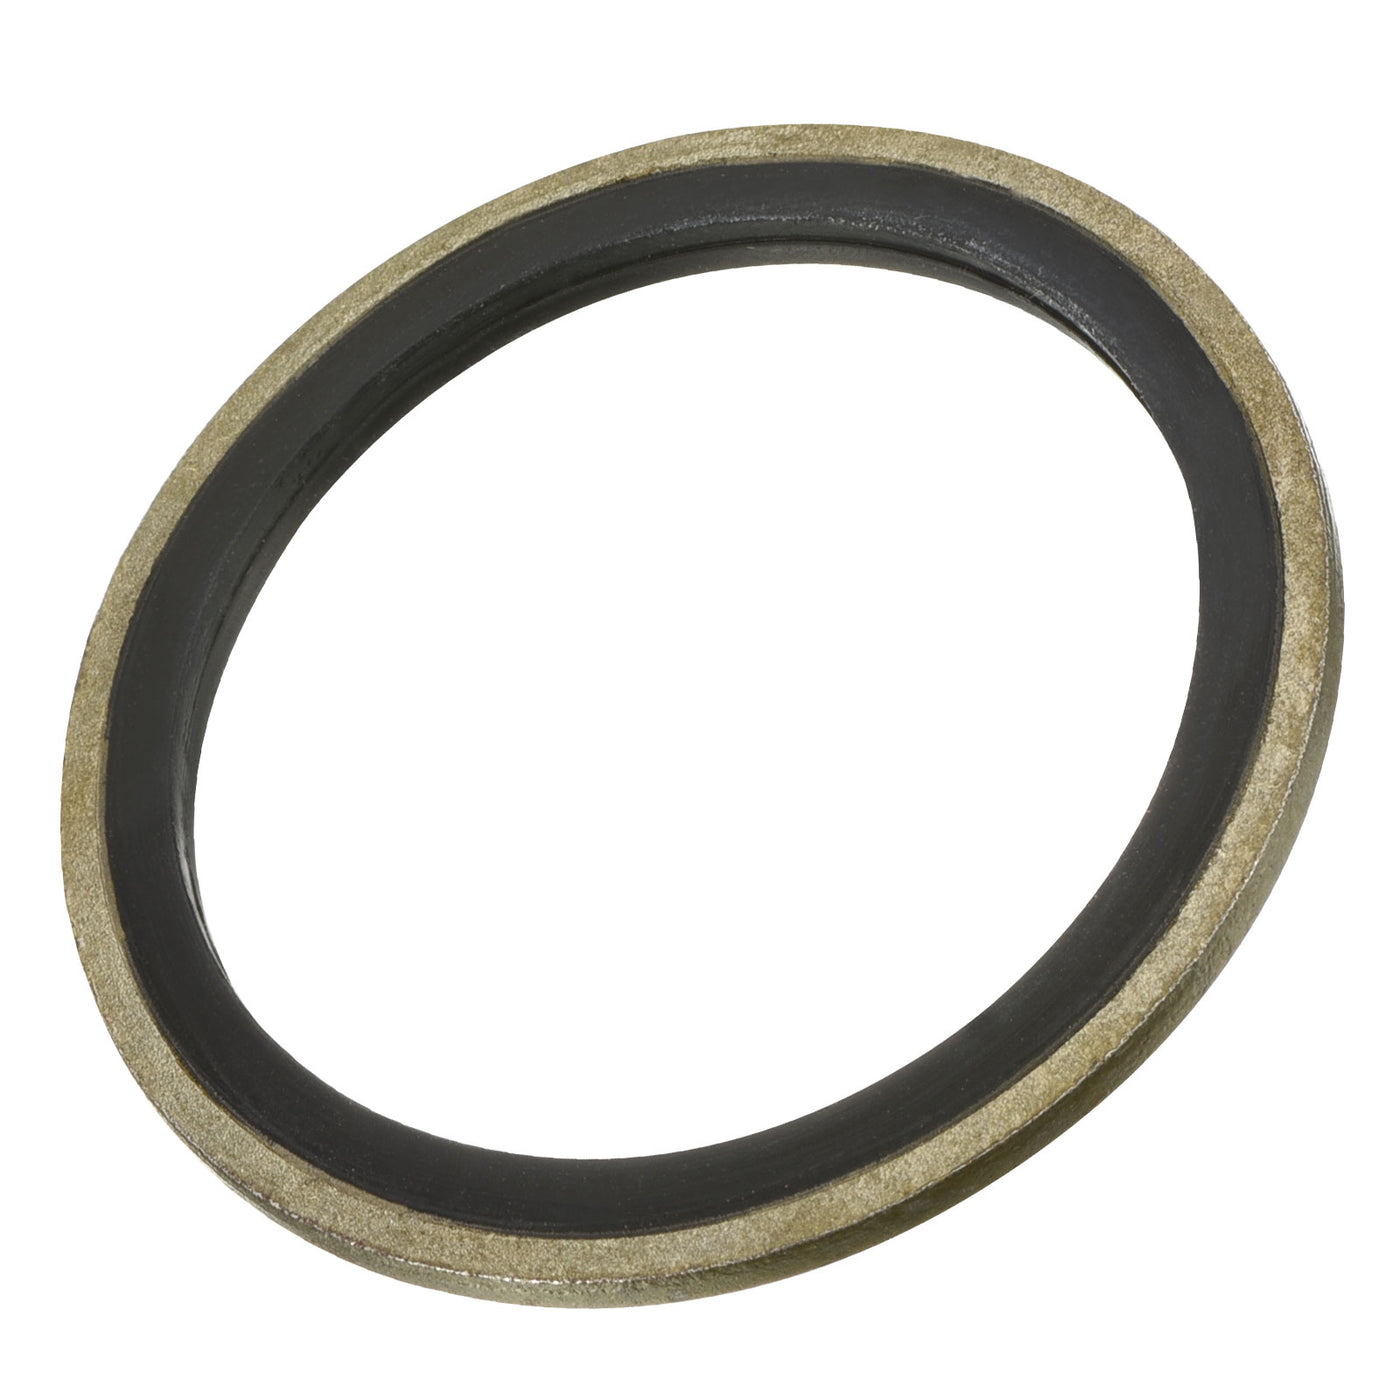 Harfington Bonded Sealing Washers M36 45.4x36x2mm Carbon Steel Nitrile Rubber Gasket, Pack of 10